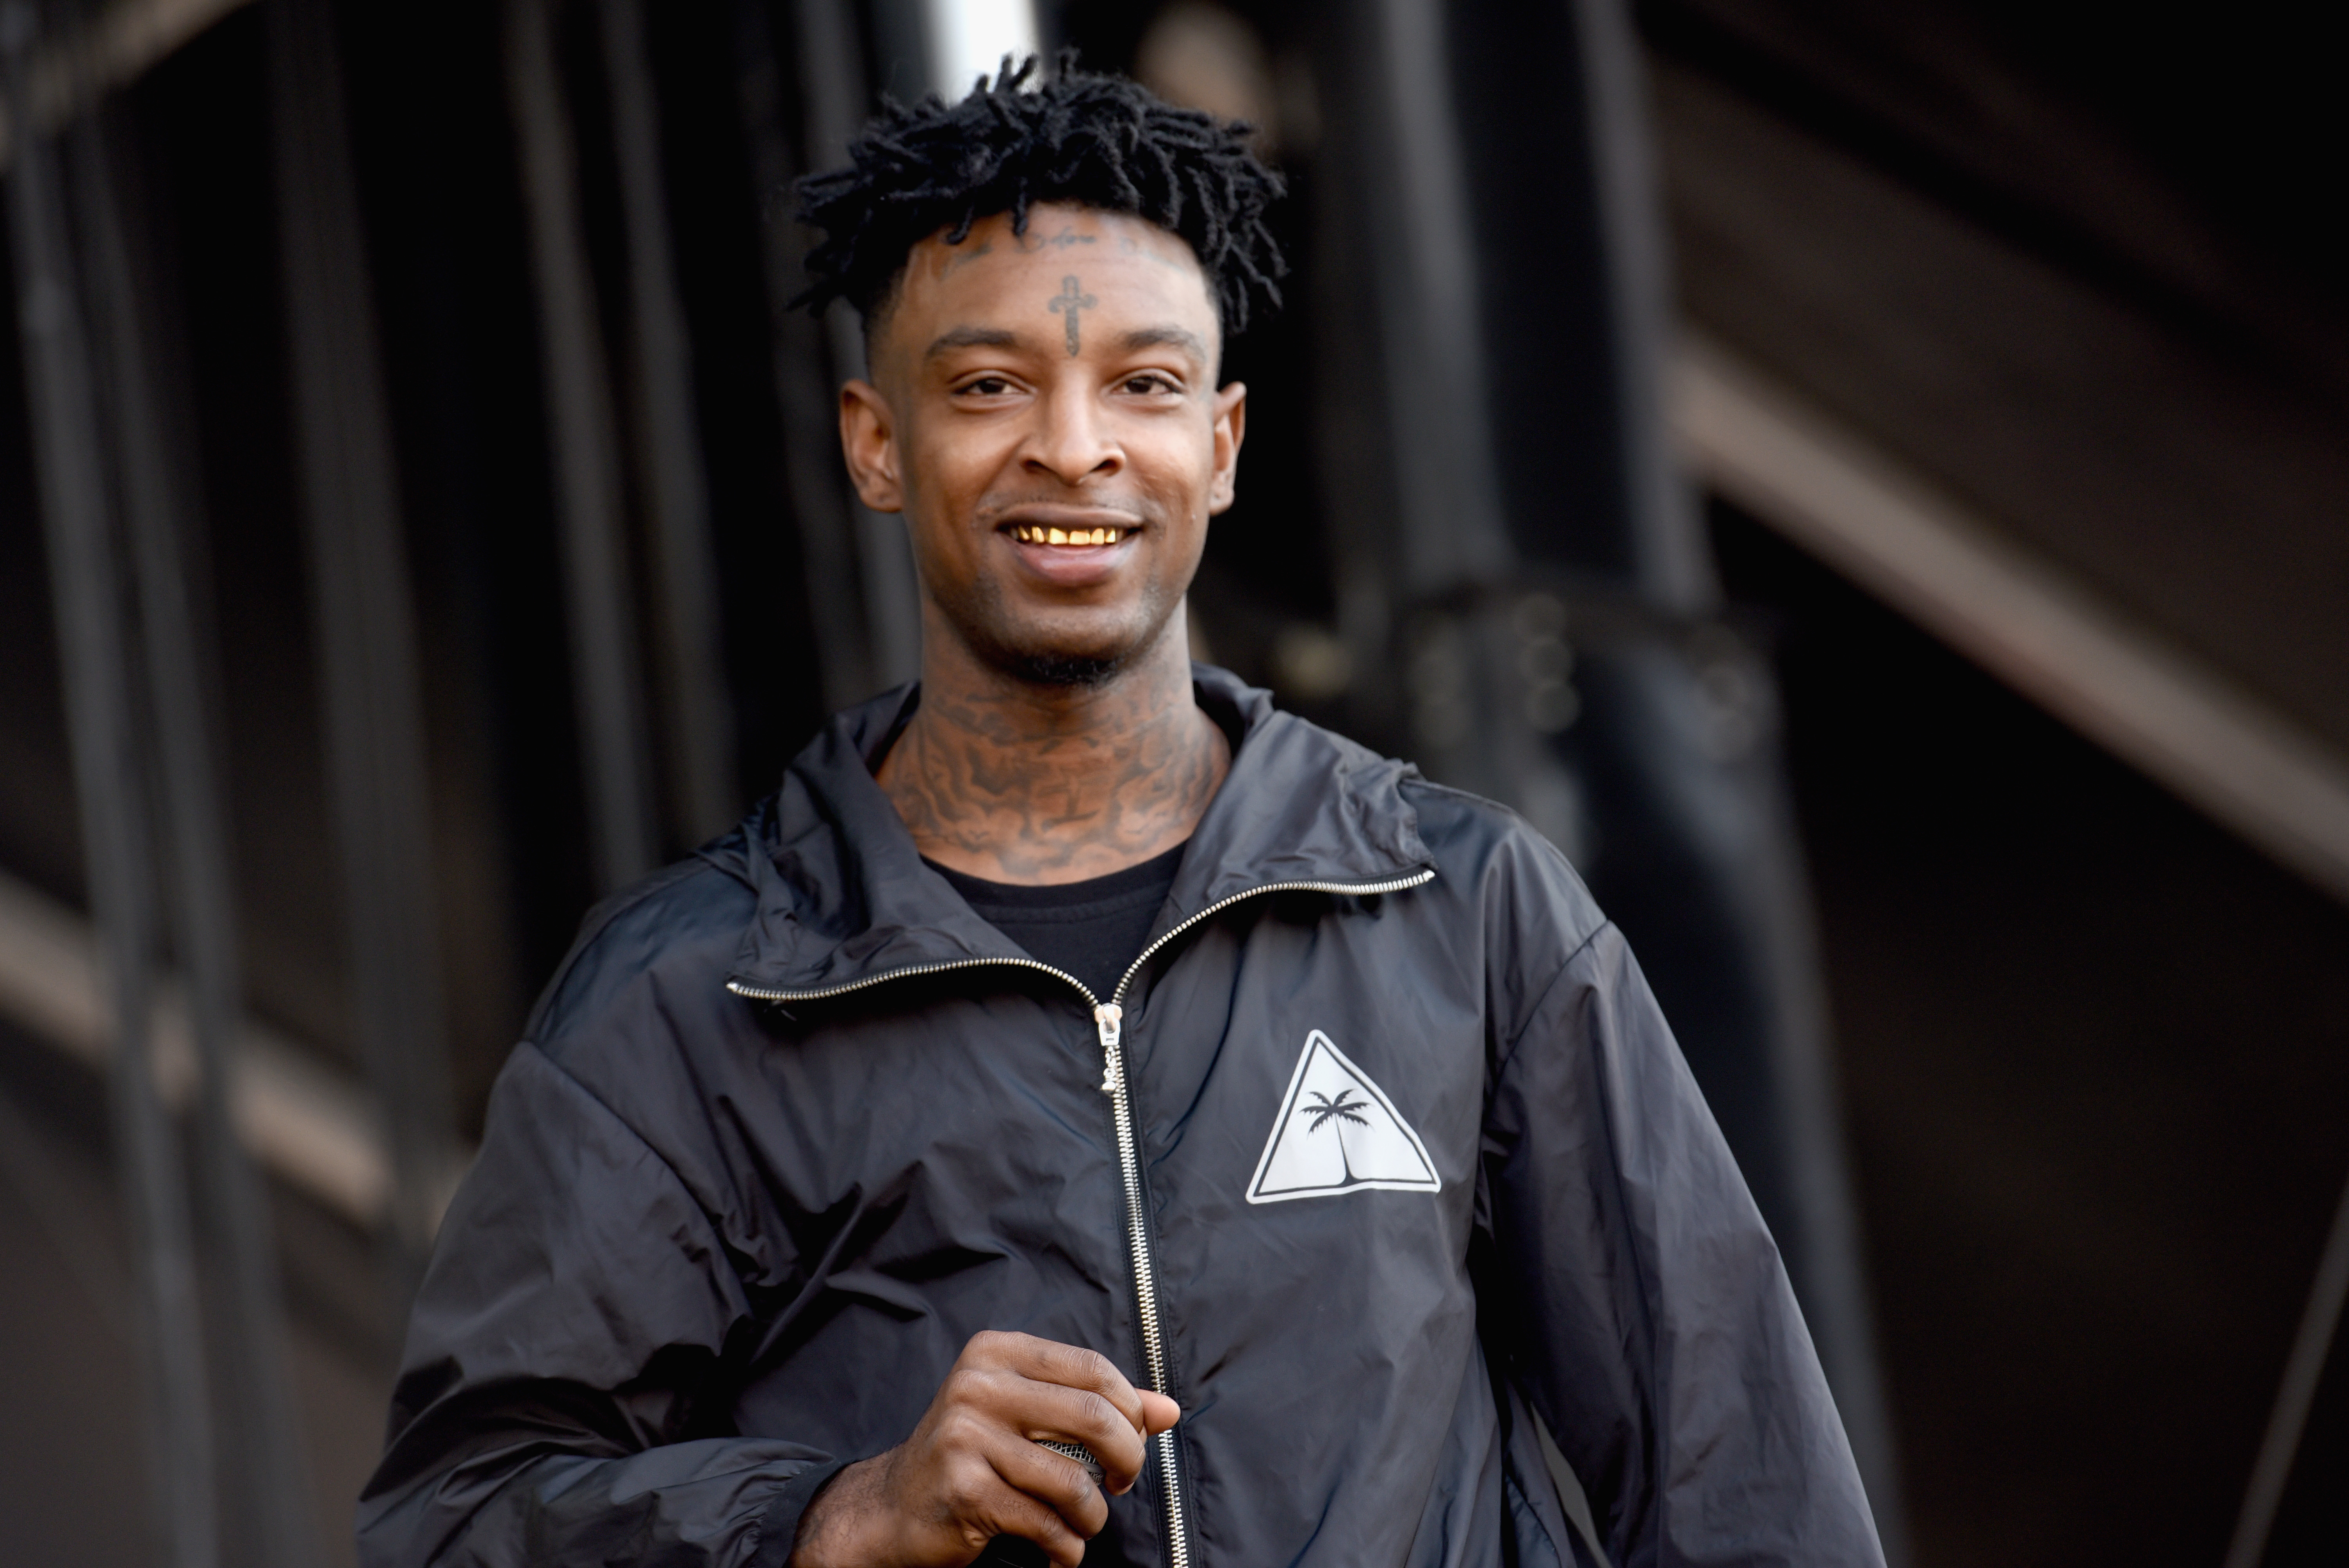 21 Savage - Can't Leave Without It ft. Gunna & Lil Baby (Prod. by